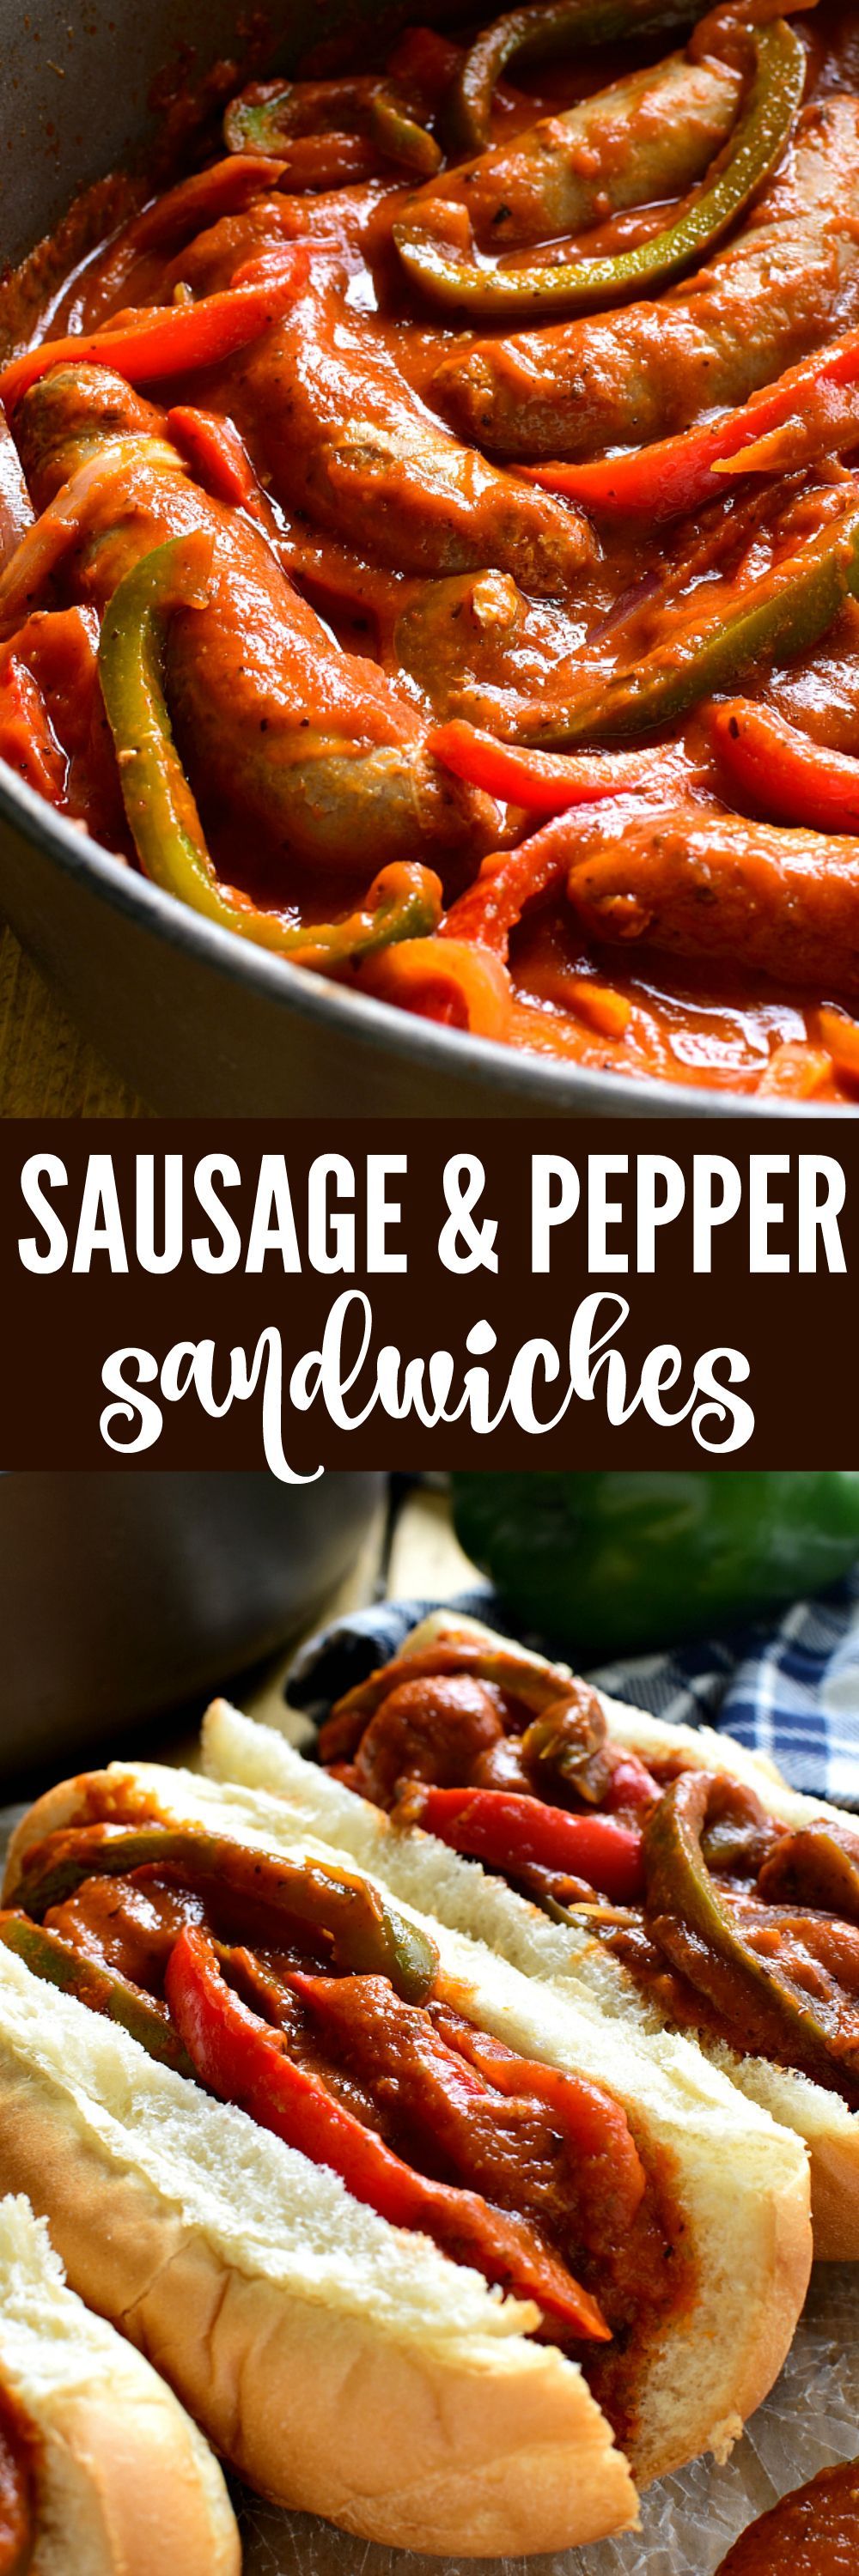 CAs Recipes | These Sausage & Pepper Sandwiches are like comfort in a sandwich roll! They combine the delicious flavor of Italian Sausages with fresh red & green peppers, onion, spices, and marinara sauce. Perfect for game days or easy weeknight dinners...they're sure to become a new family favorite! -   25 hot sausage recipes
 ideas